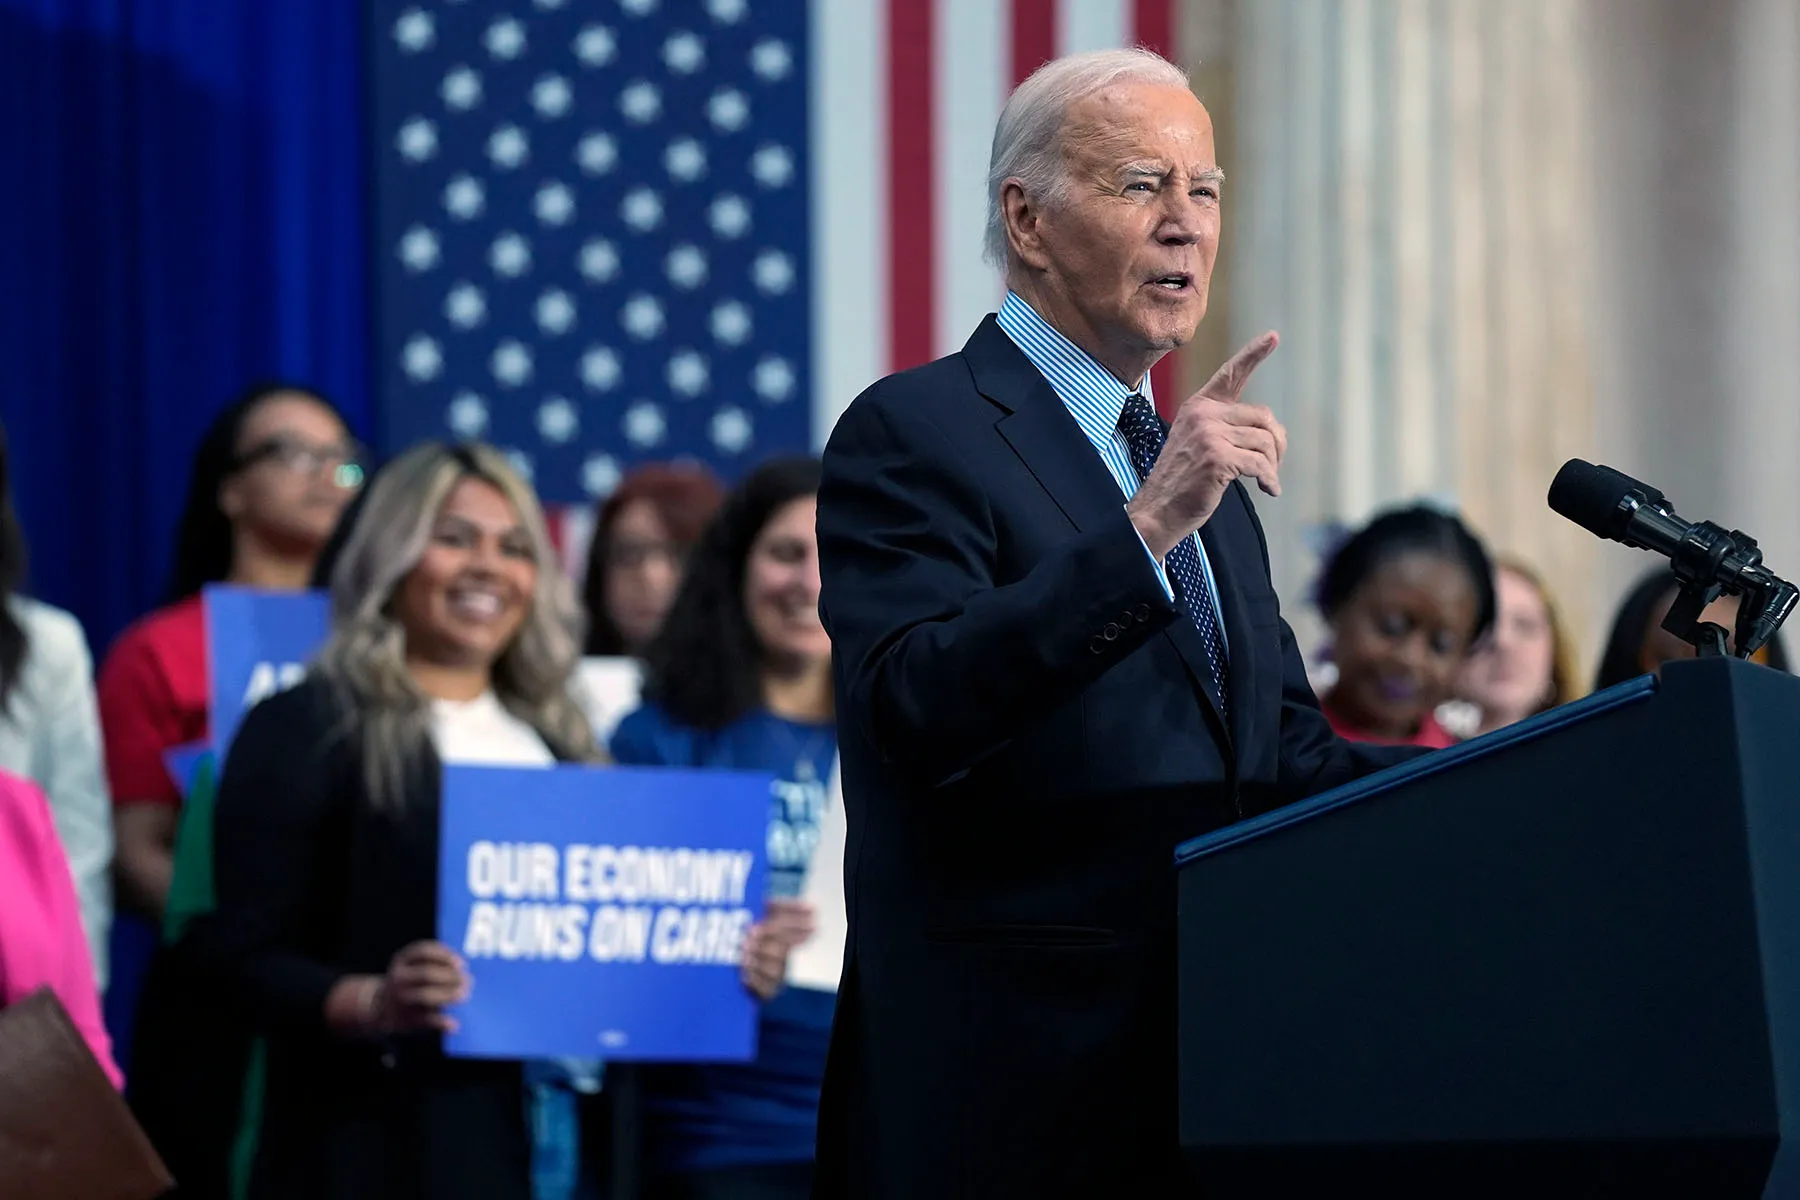 President Biden is seen at a podium delivering remarks on proposed spending on child care and other investments in the "care economy."